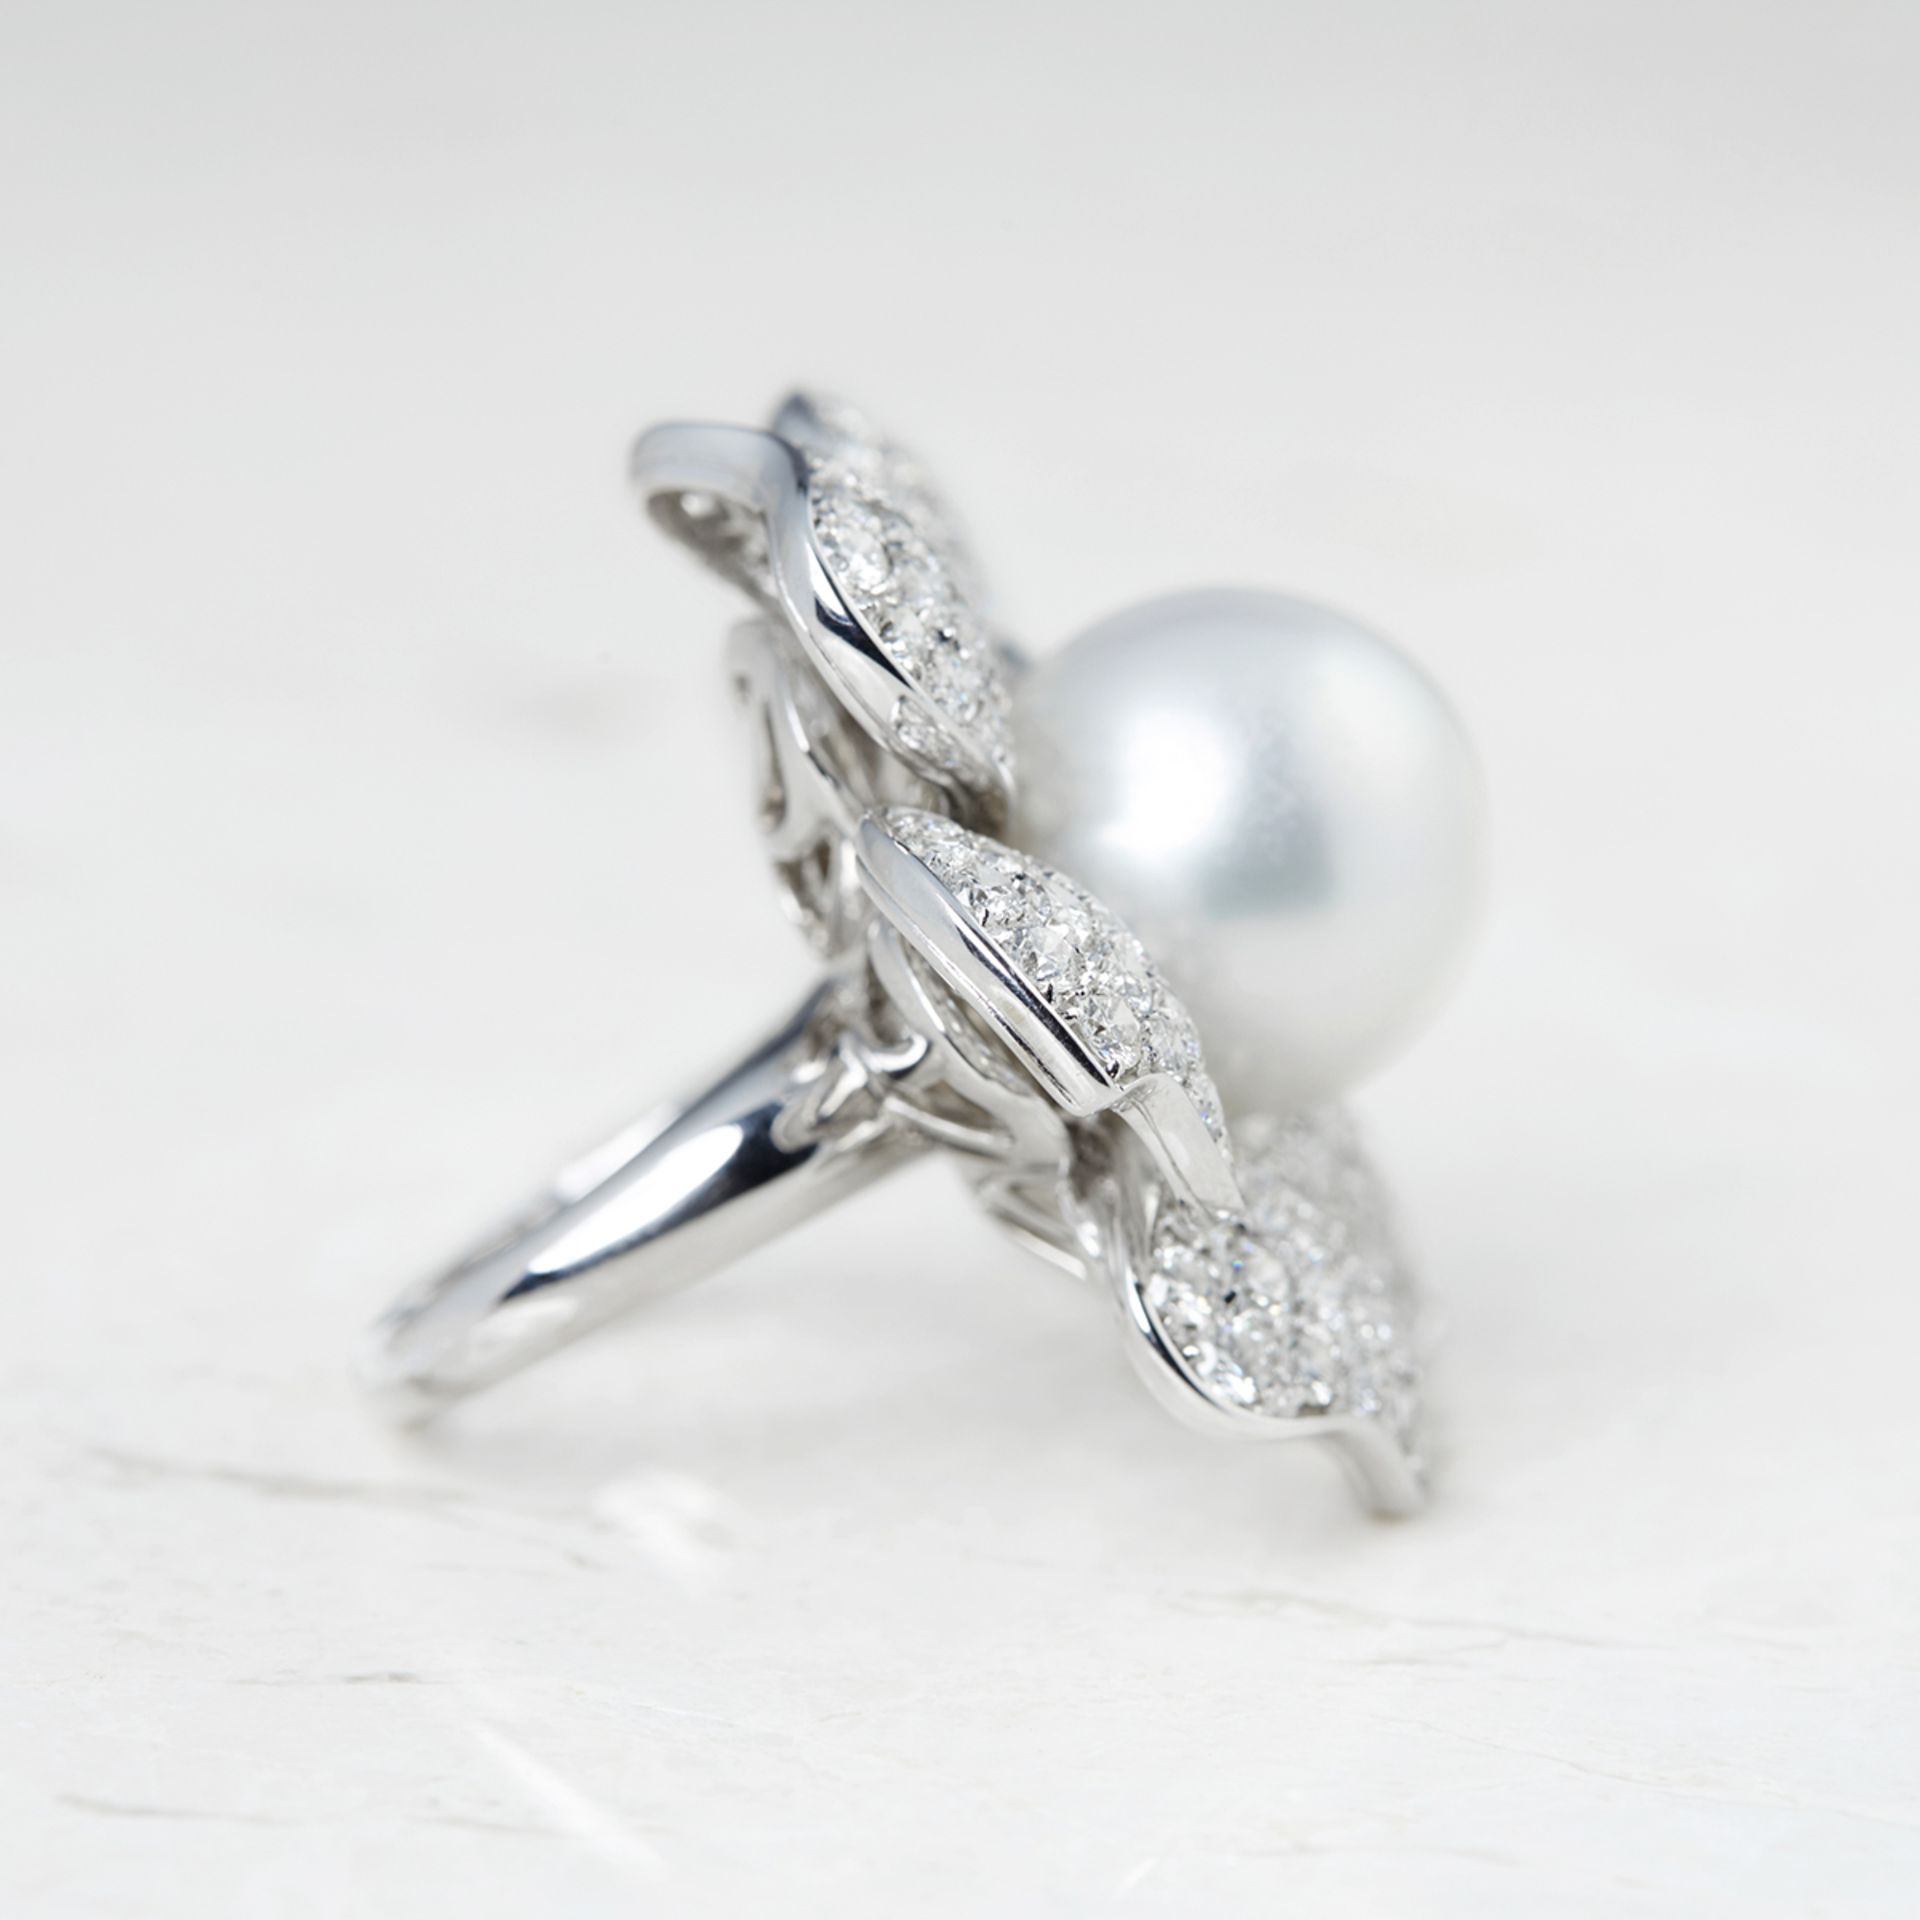 Picchiotti 18k White Gold South Sea Pearl & 7.80ct Diamond Flower Ring - Image 3 of 5